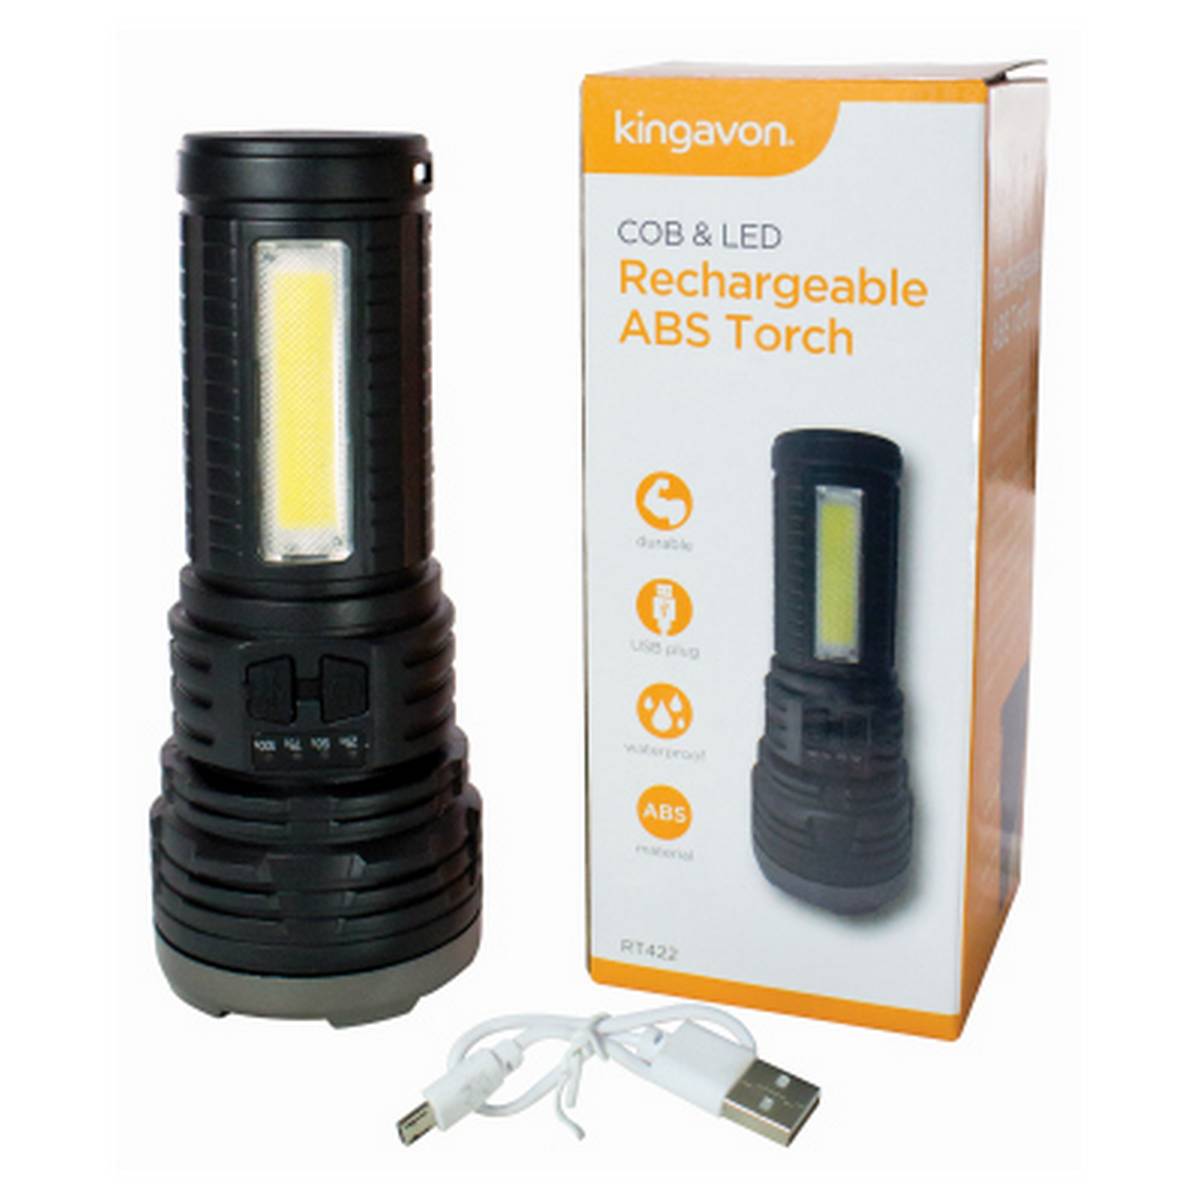 KINGAVON COB AND LED RECHARGEABLE ABS TORCH BB-RT422